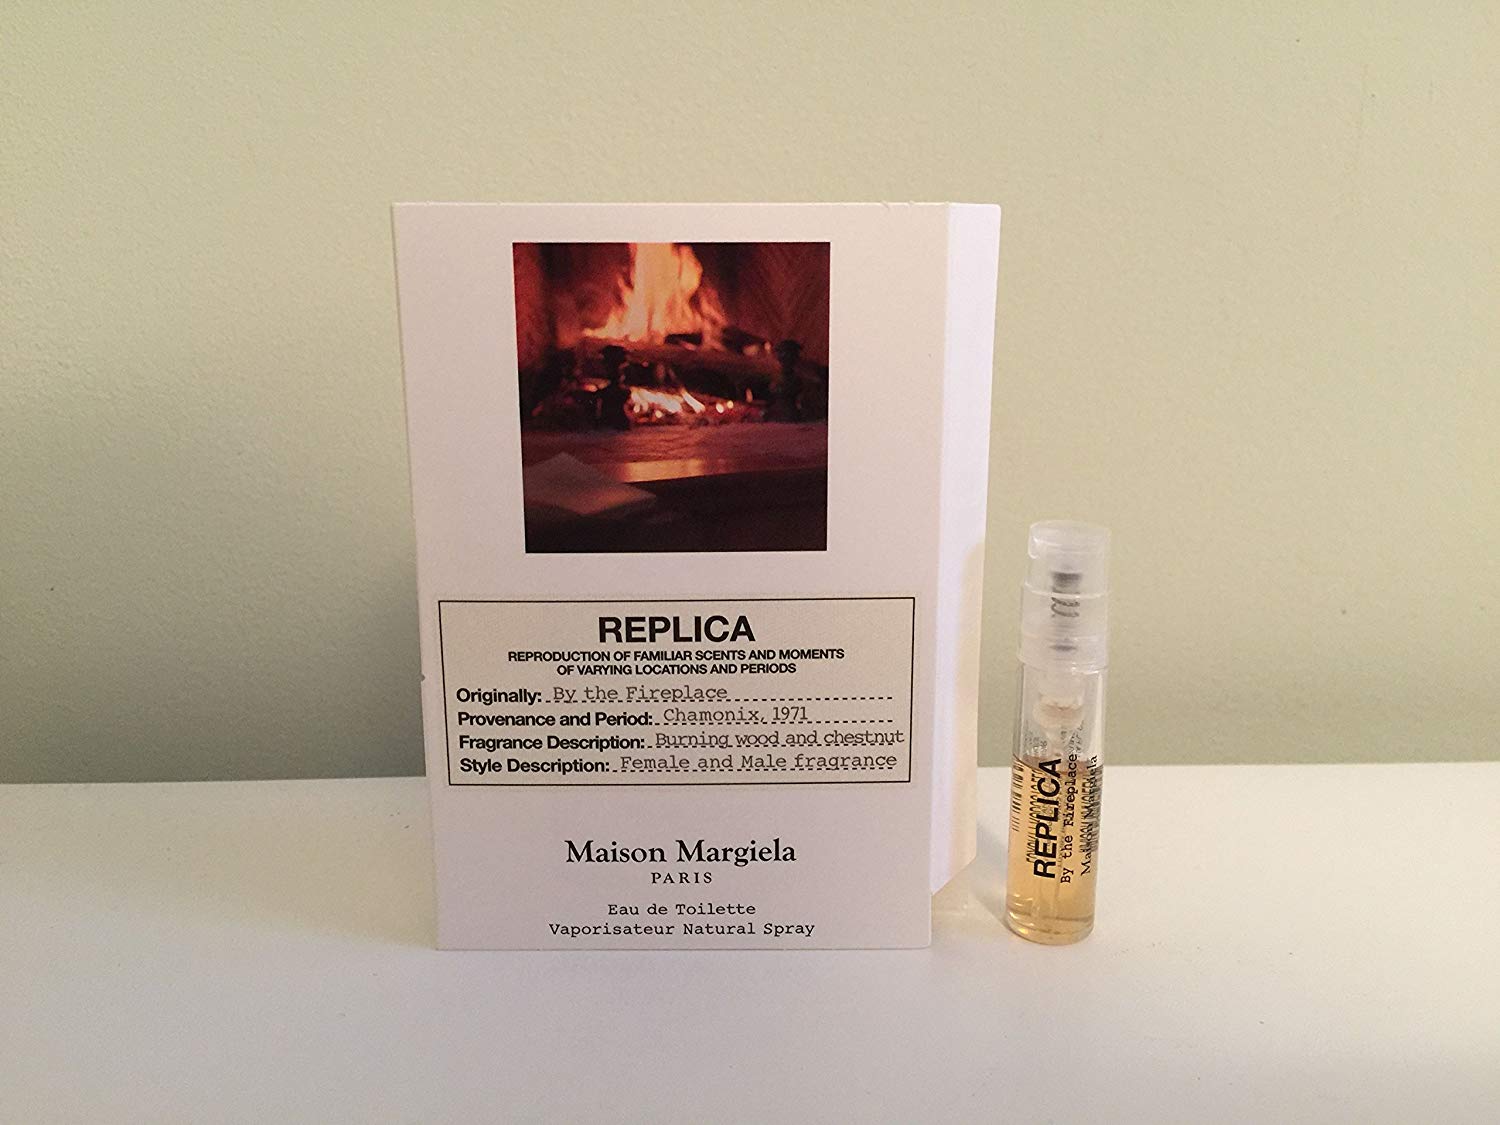 Maison Margiela Replica by the Fireplace Elegant Maison Martin Margiela Replica by the Fireplace Fragrance Deluxe Travel Size 0 04 Oz